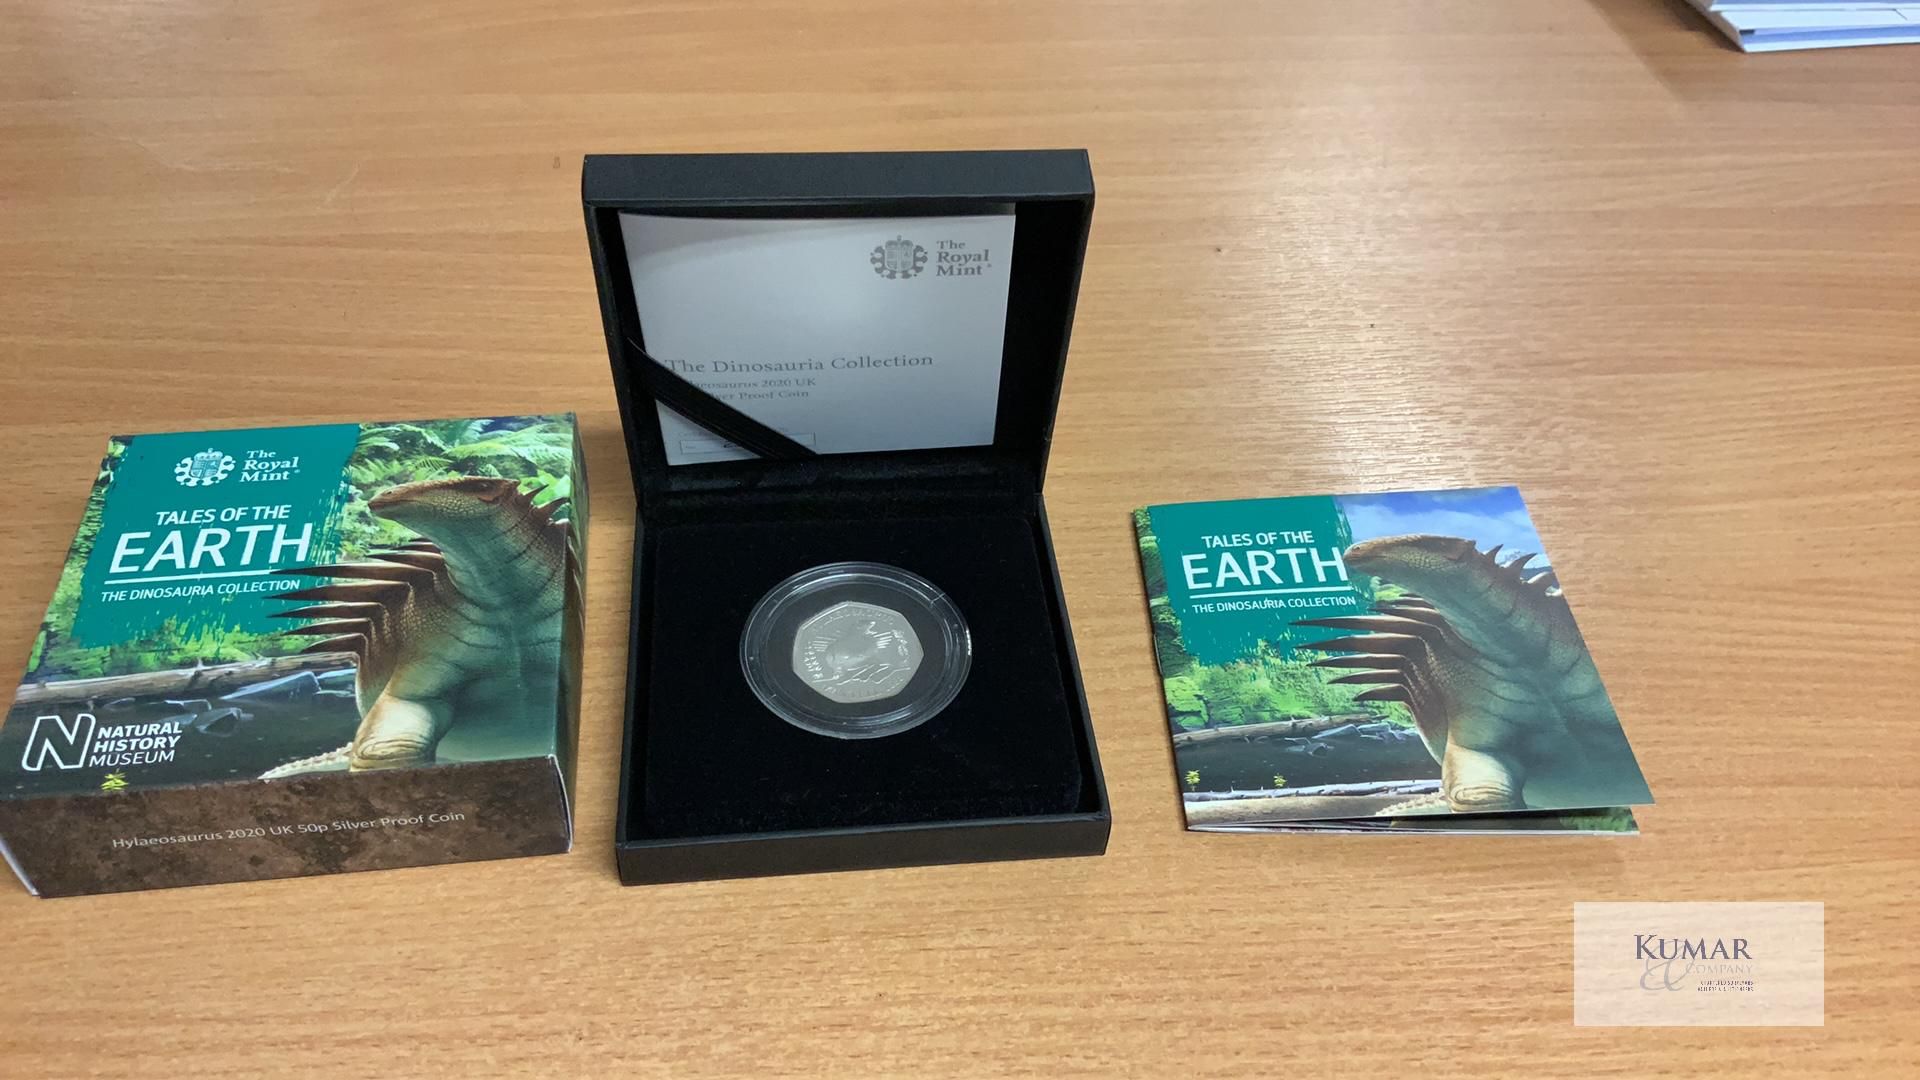 The Royal Mint Coin- Tales of the Earth - The Dinosauria Collection Hylaeosaurus 2020 UK 50p - Image 2 of 4